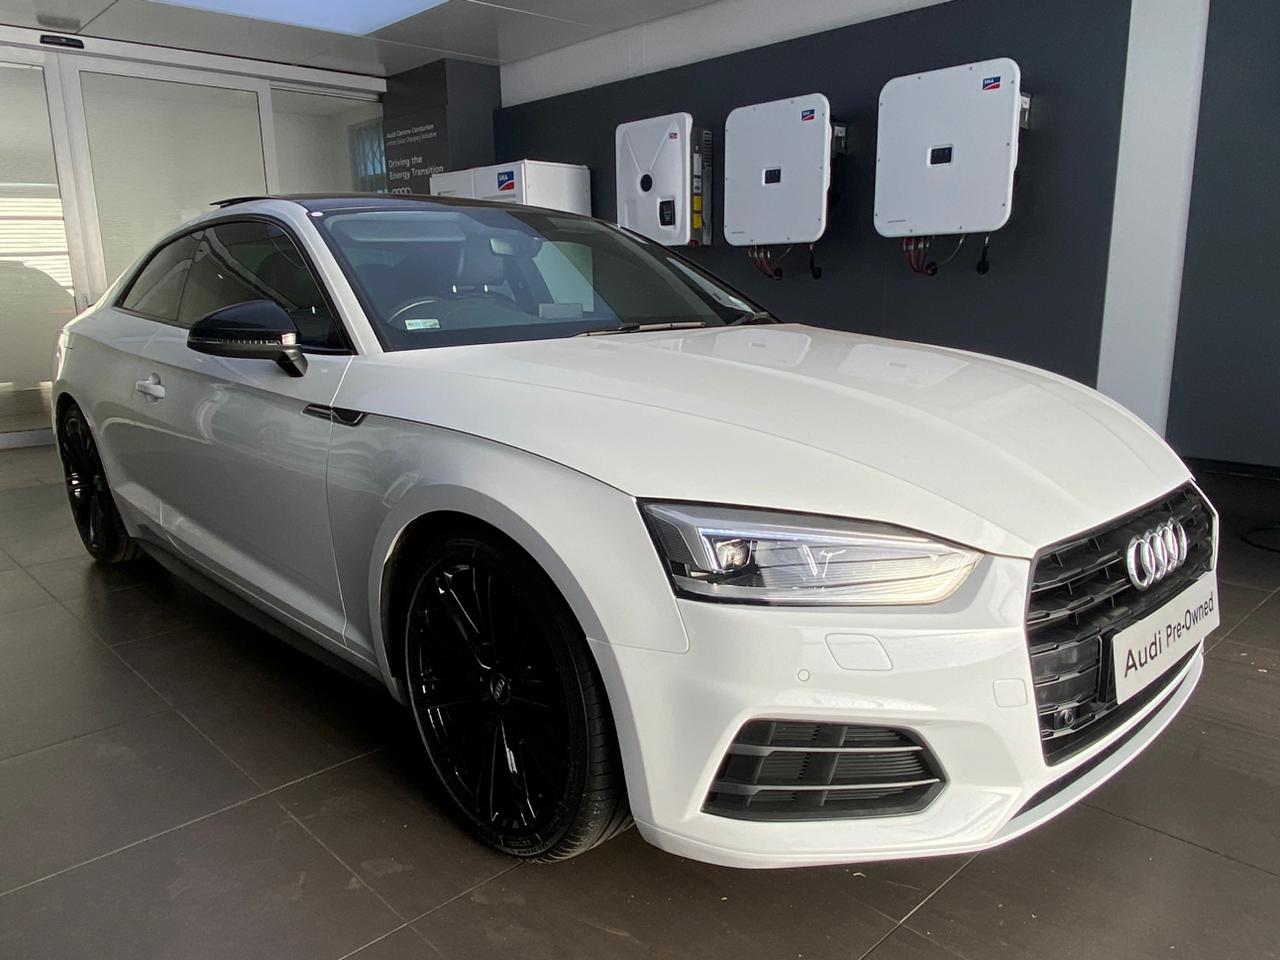 2018 Audi A5  for sale - 0489POAA017450